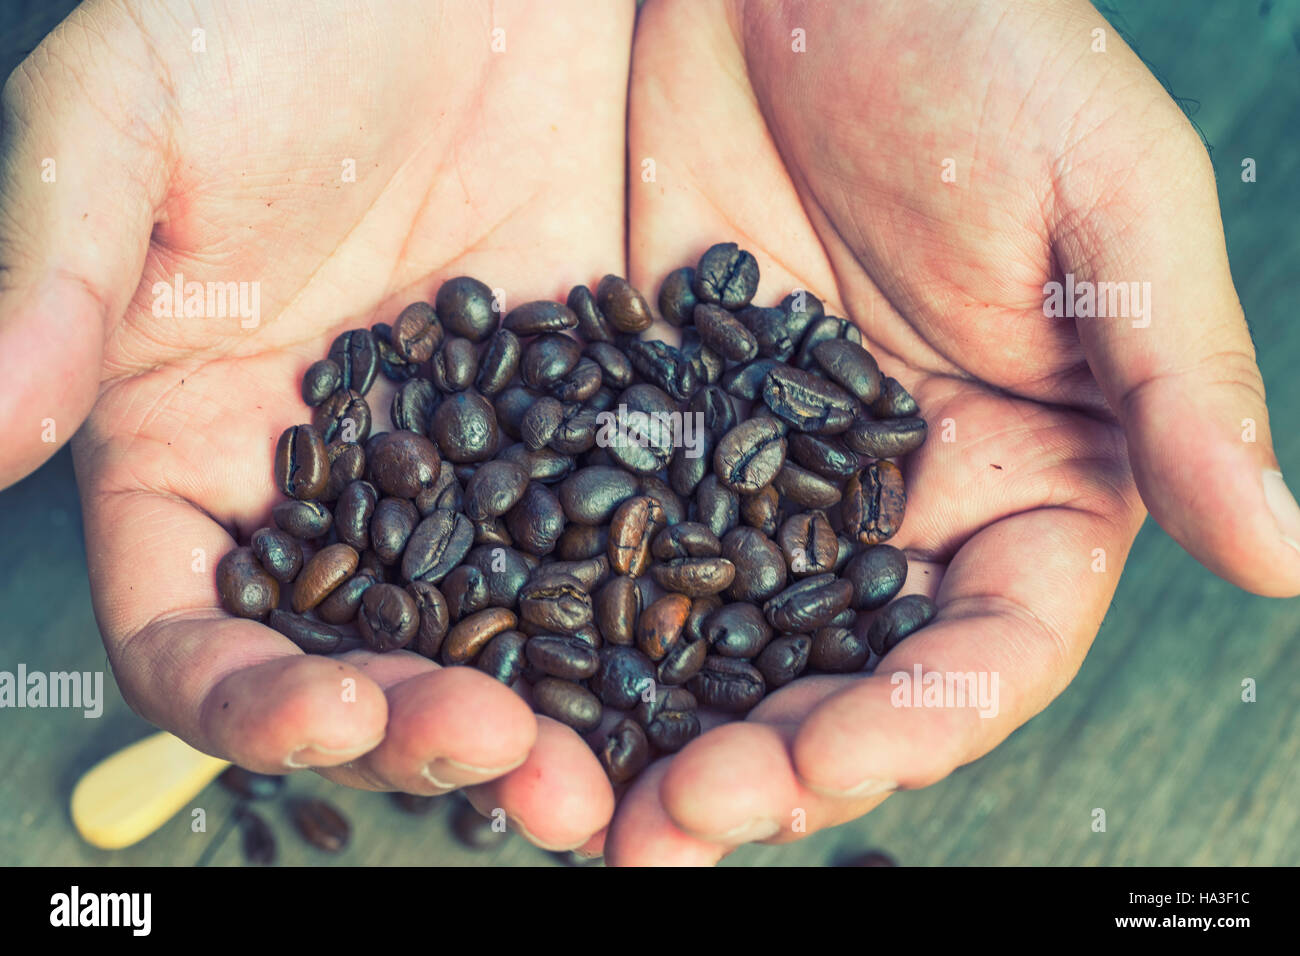 https://c8.alamy.com/comp/HA3F1C/abstract-blur-coffee-bean-was-selected-on-hand-with-vintage-filter-HA3F1C.jpg